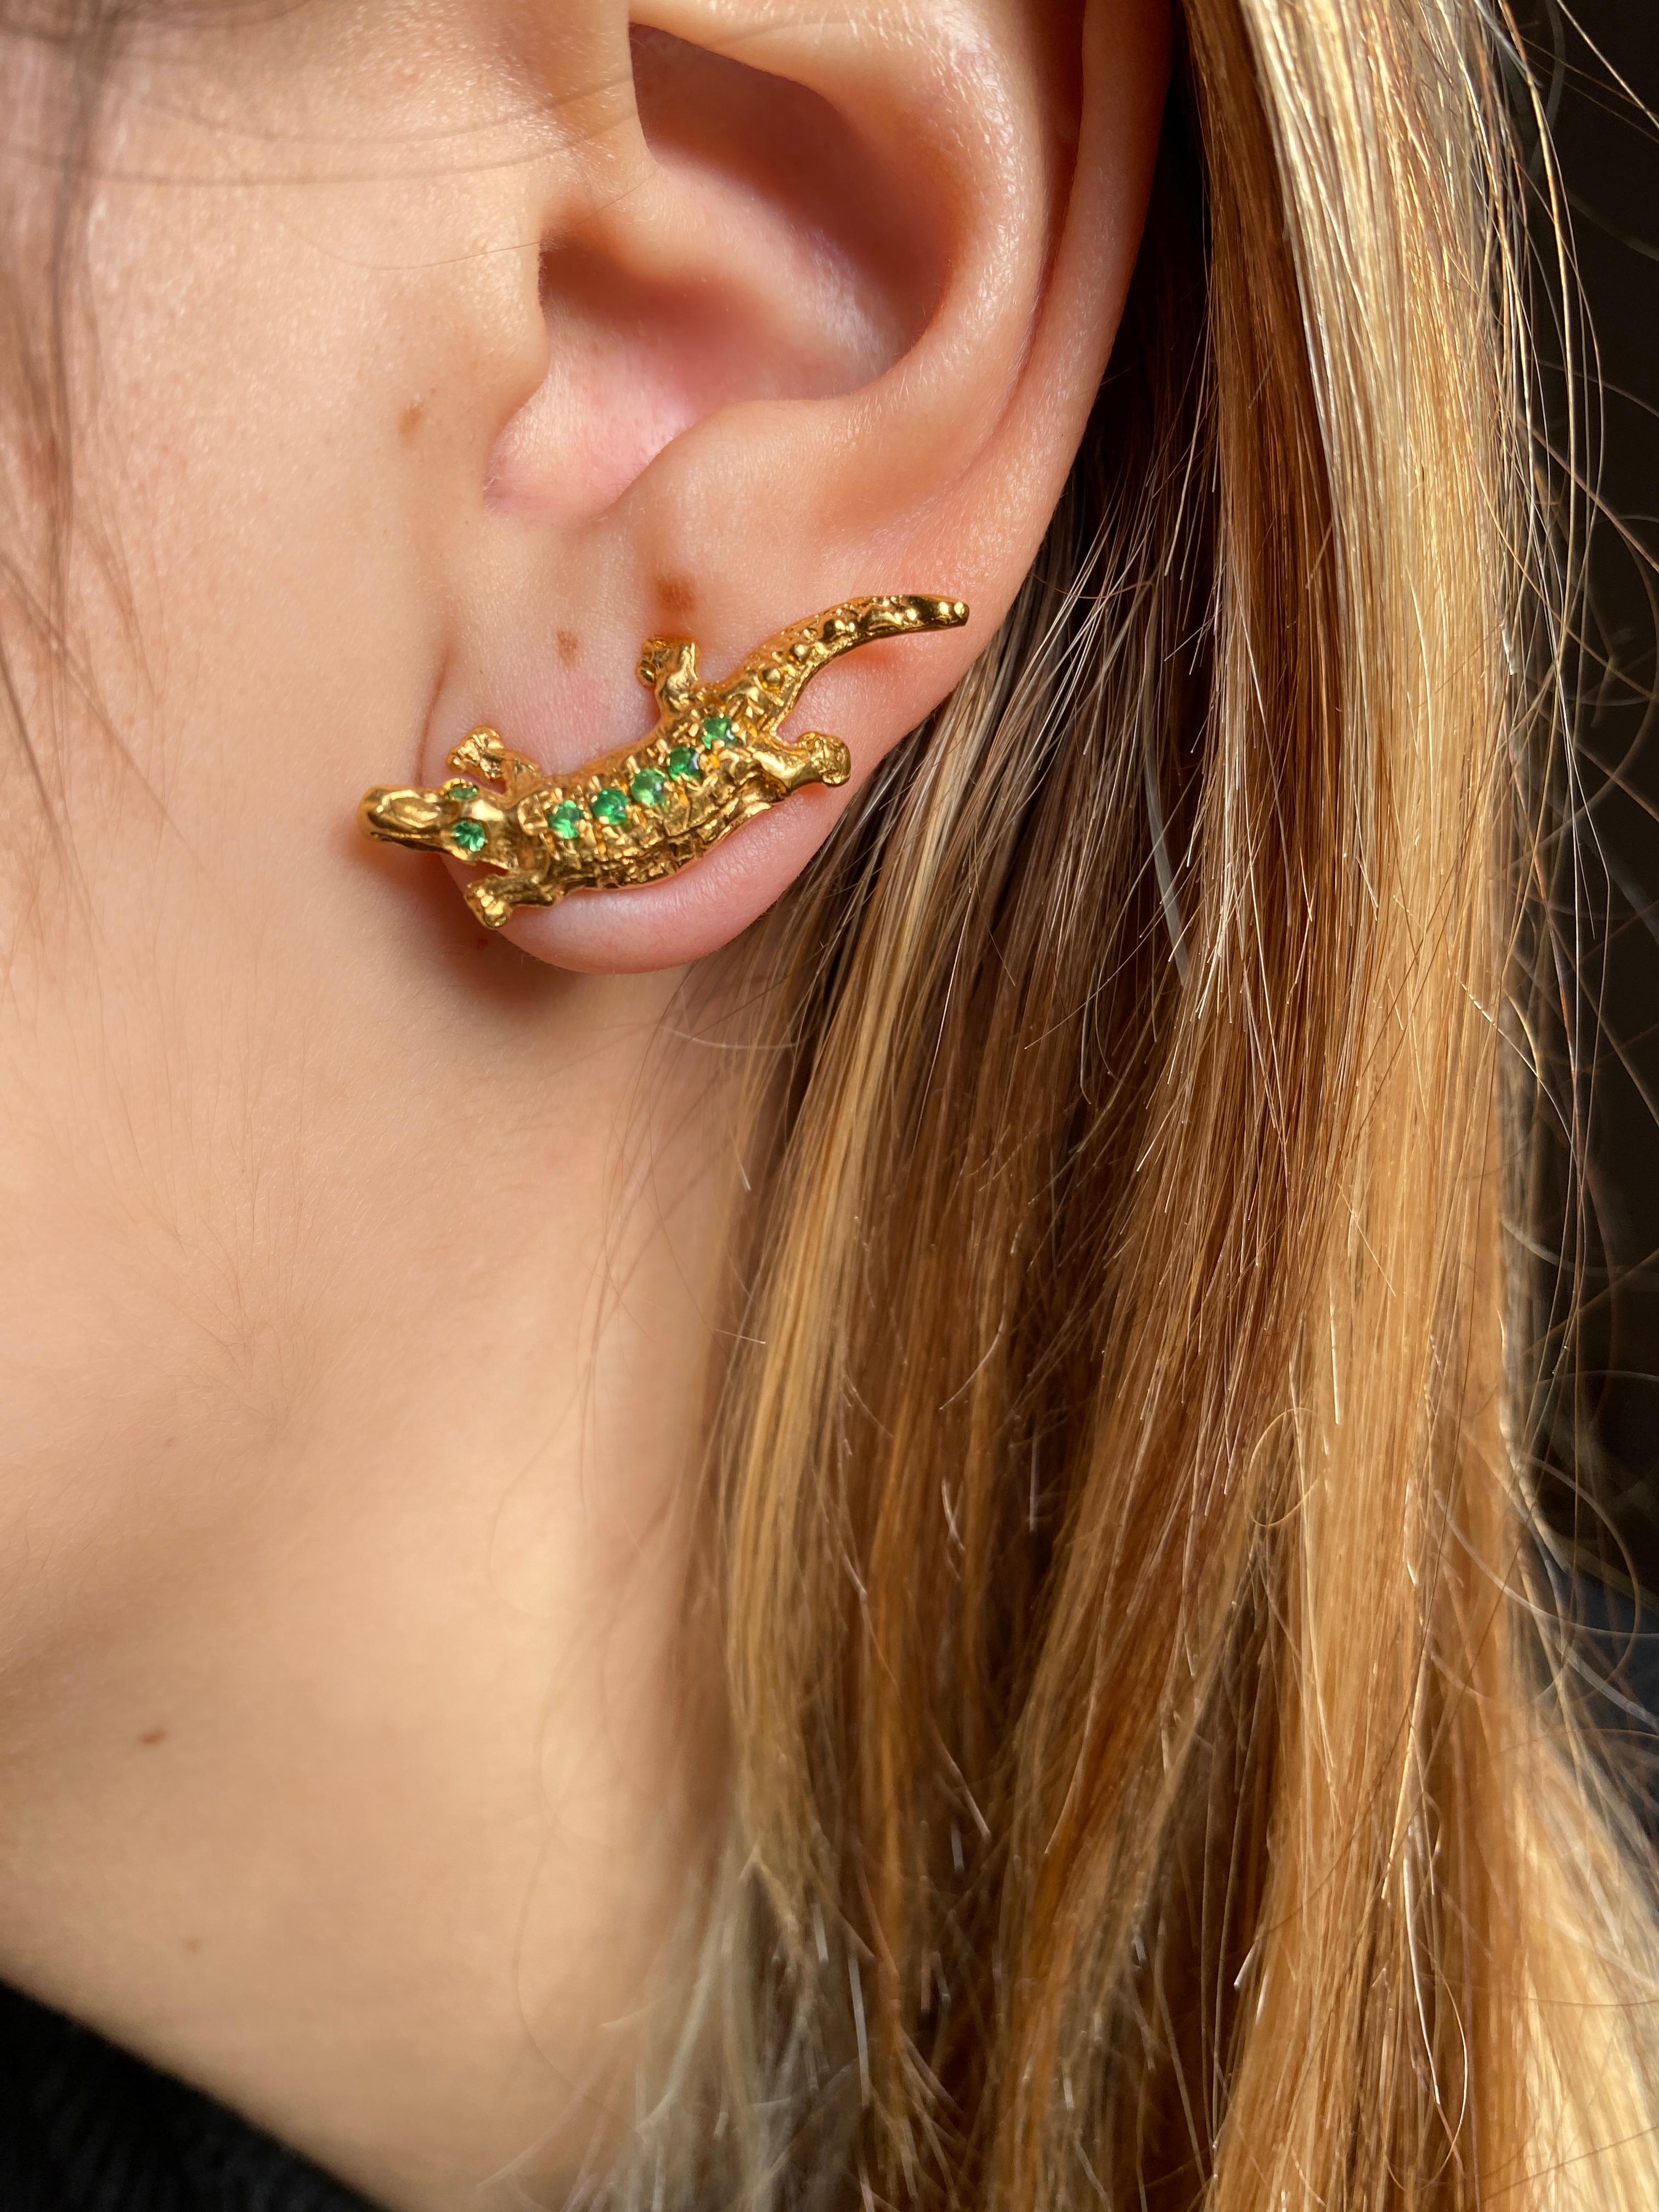 Introducing the Rossella Ugolini Alligator Stud Earrings, a seamless fusion of wild allure and timeless elegance. Handcrafted in Italy, these unisex earrings feature a captivating design – one alligator faces upward, while the other gracefully gazes